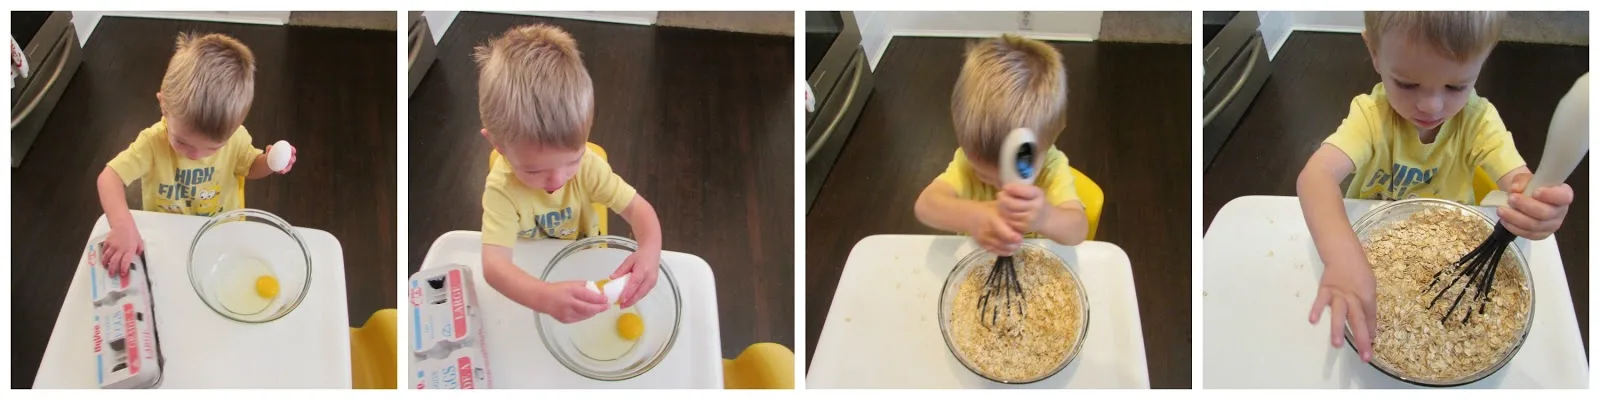 Step by step images of small child putting together baked oatmeal batter from cracking eggs to stirring oatmeal.